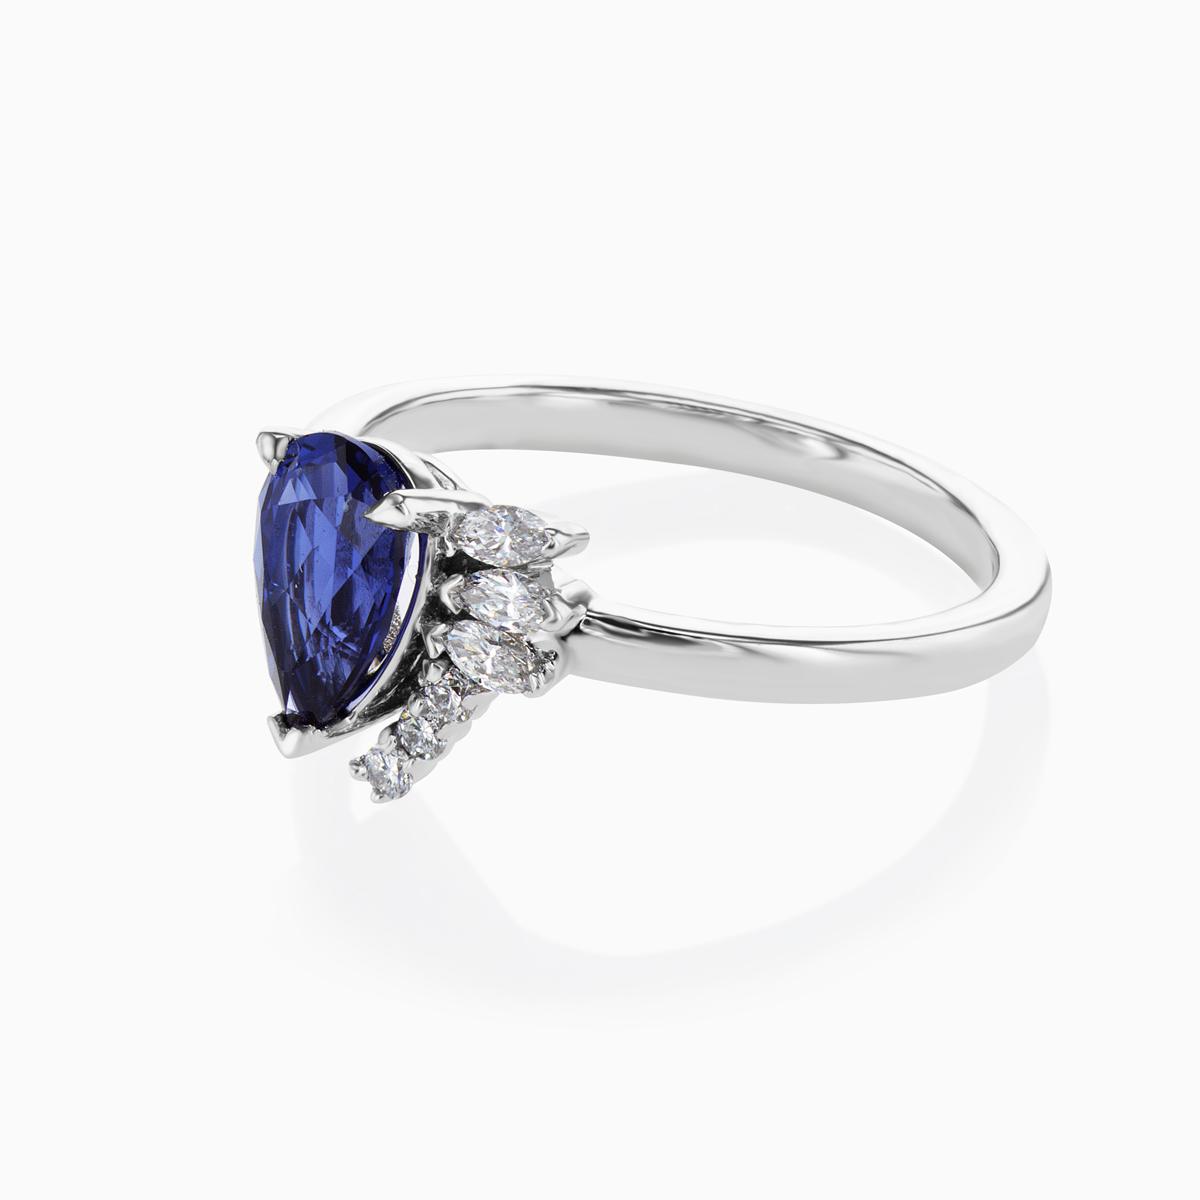 Unique Lab-grown Blue Sapphire and Diamond Engagement Ring